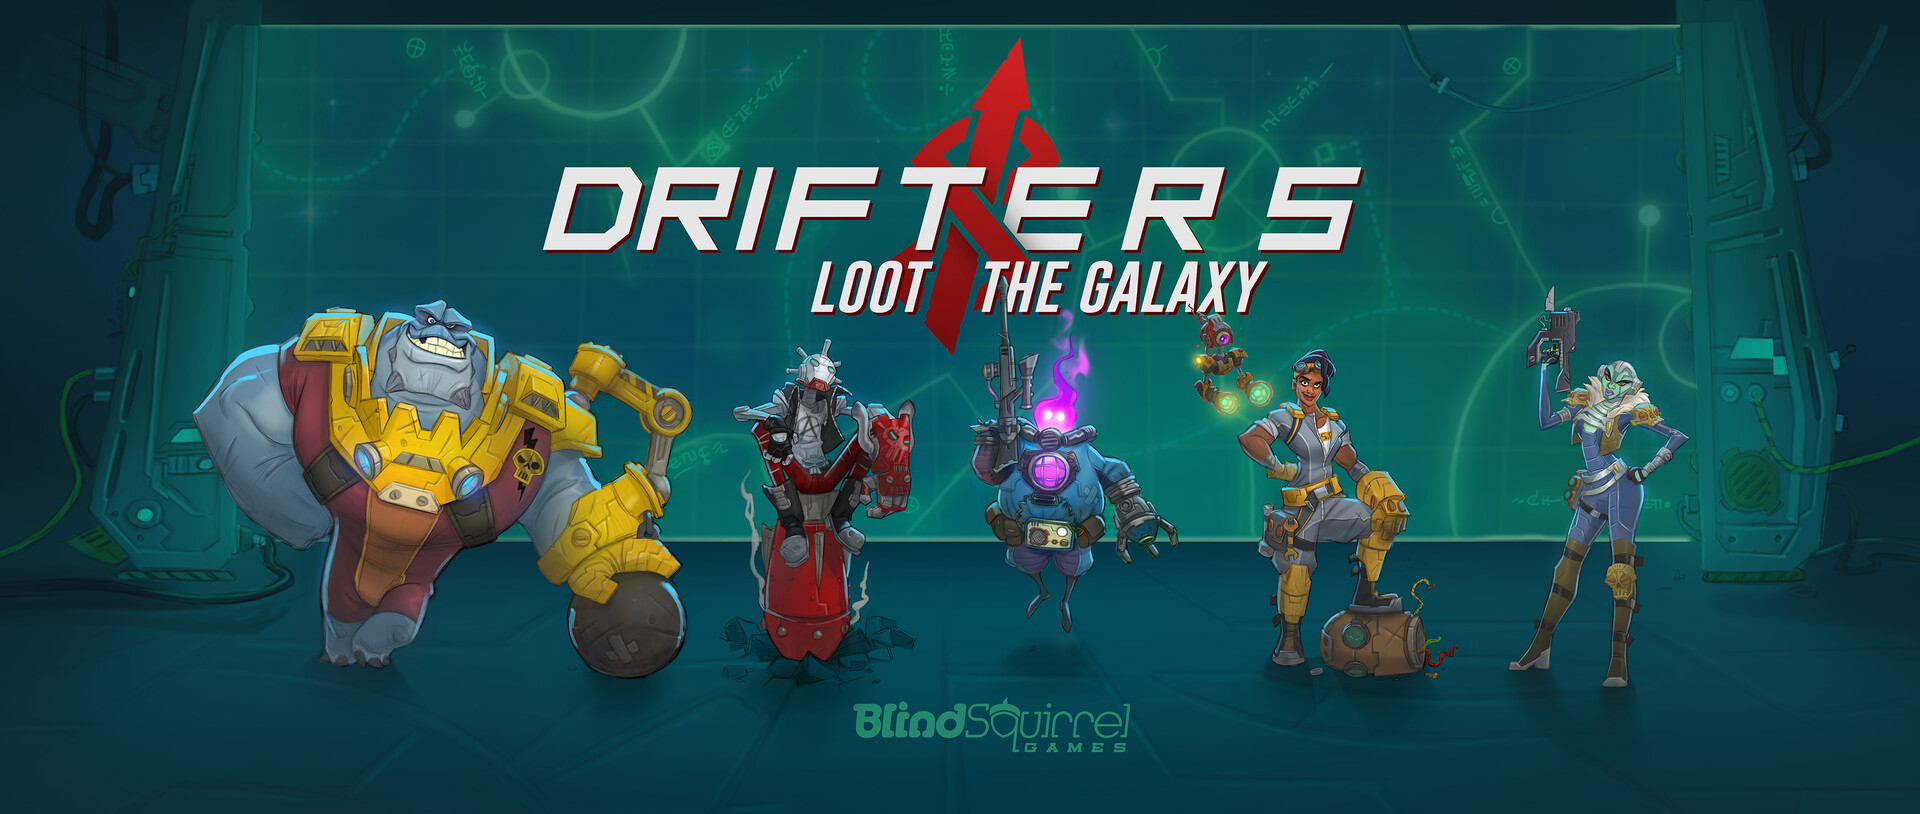 jeff merghart - Drifters 2: Secondary Characters, misc.